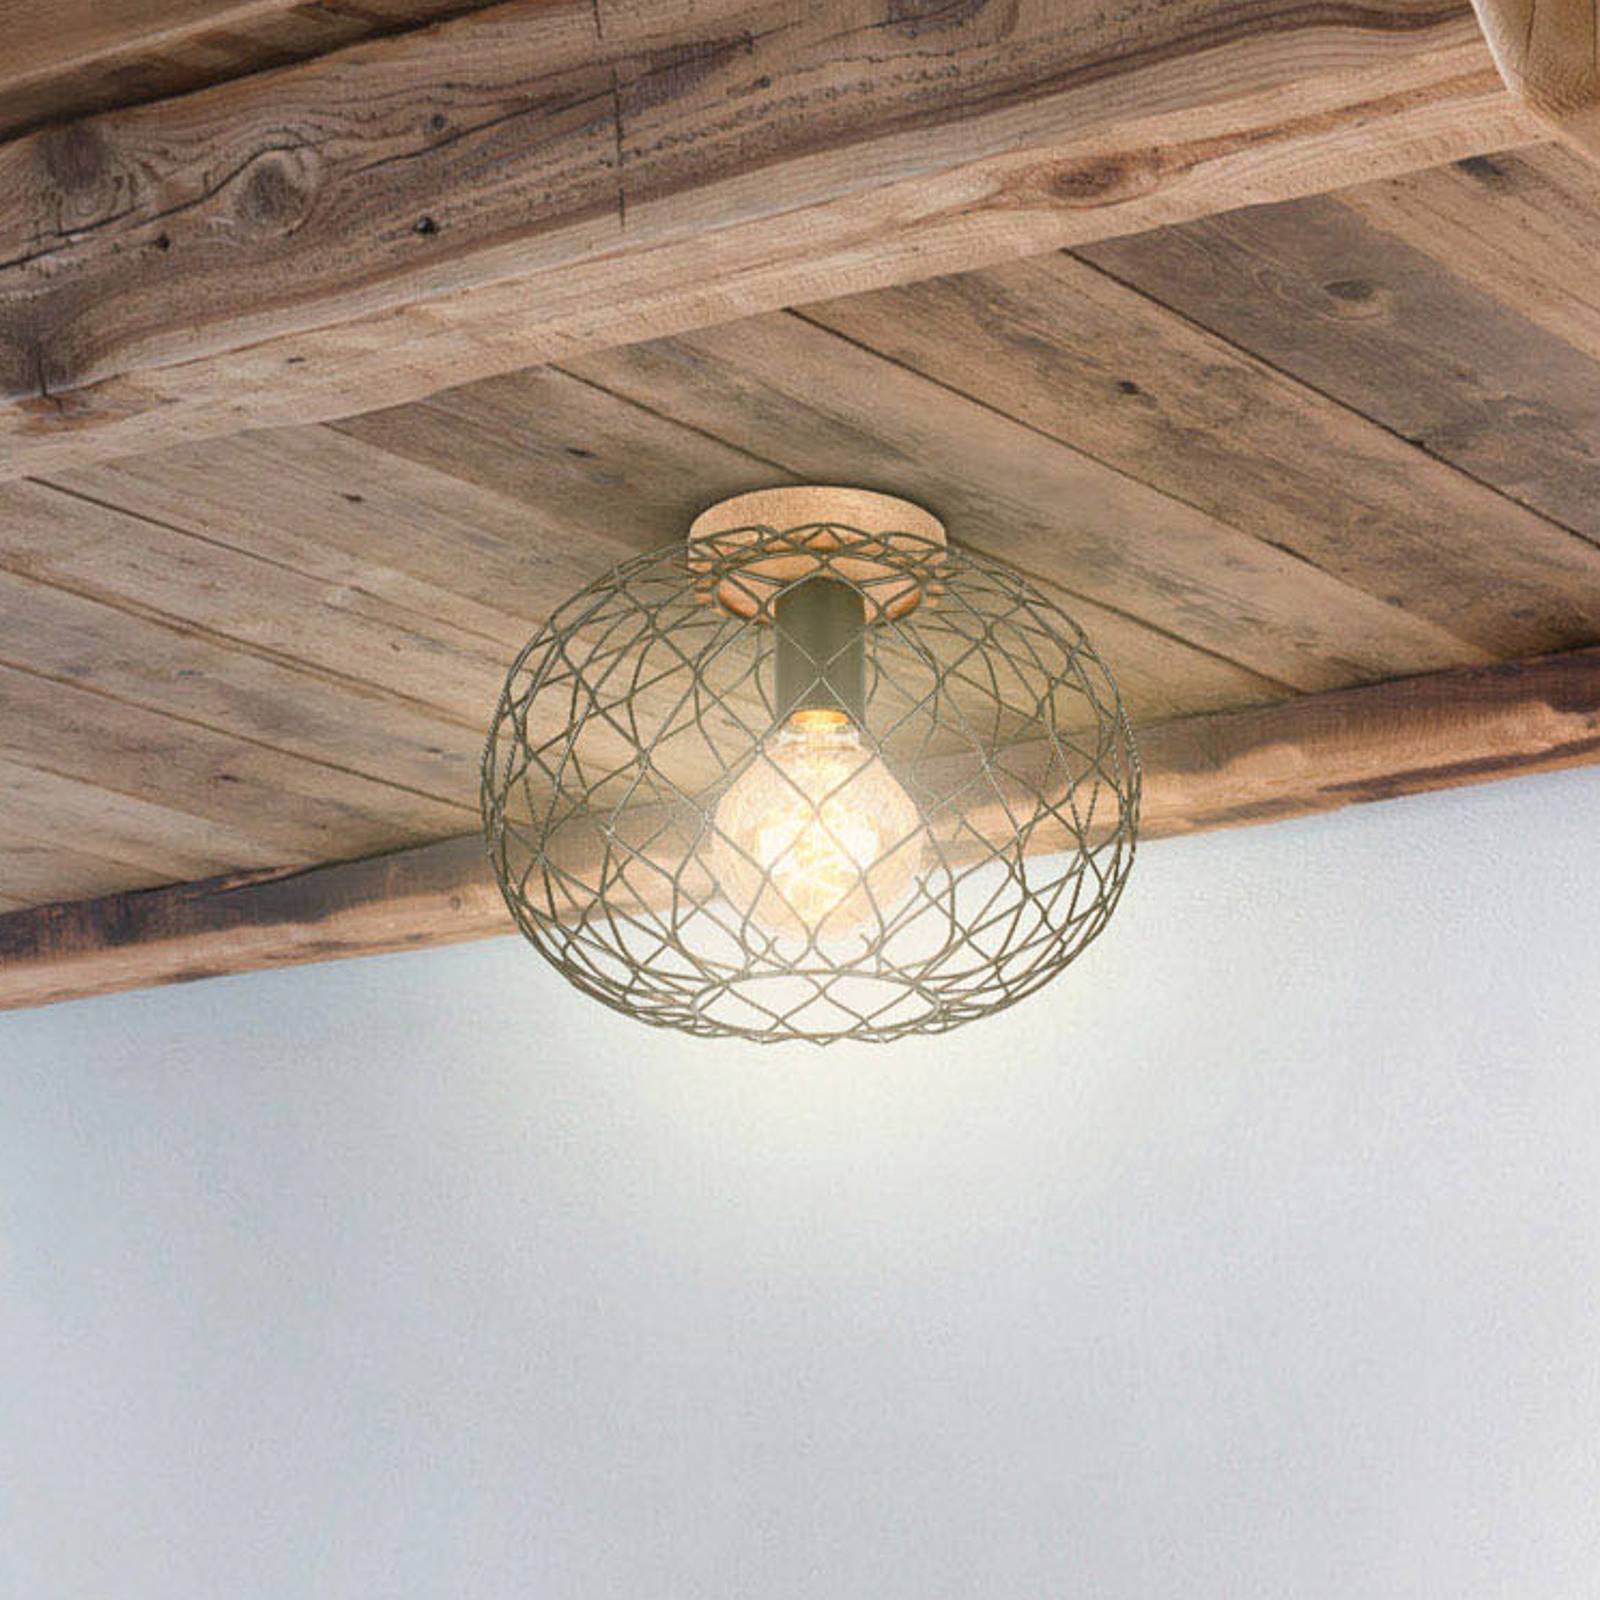 Winki ceiling light with a lattice structure